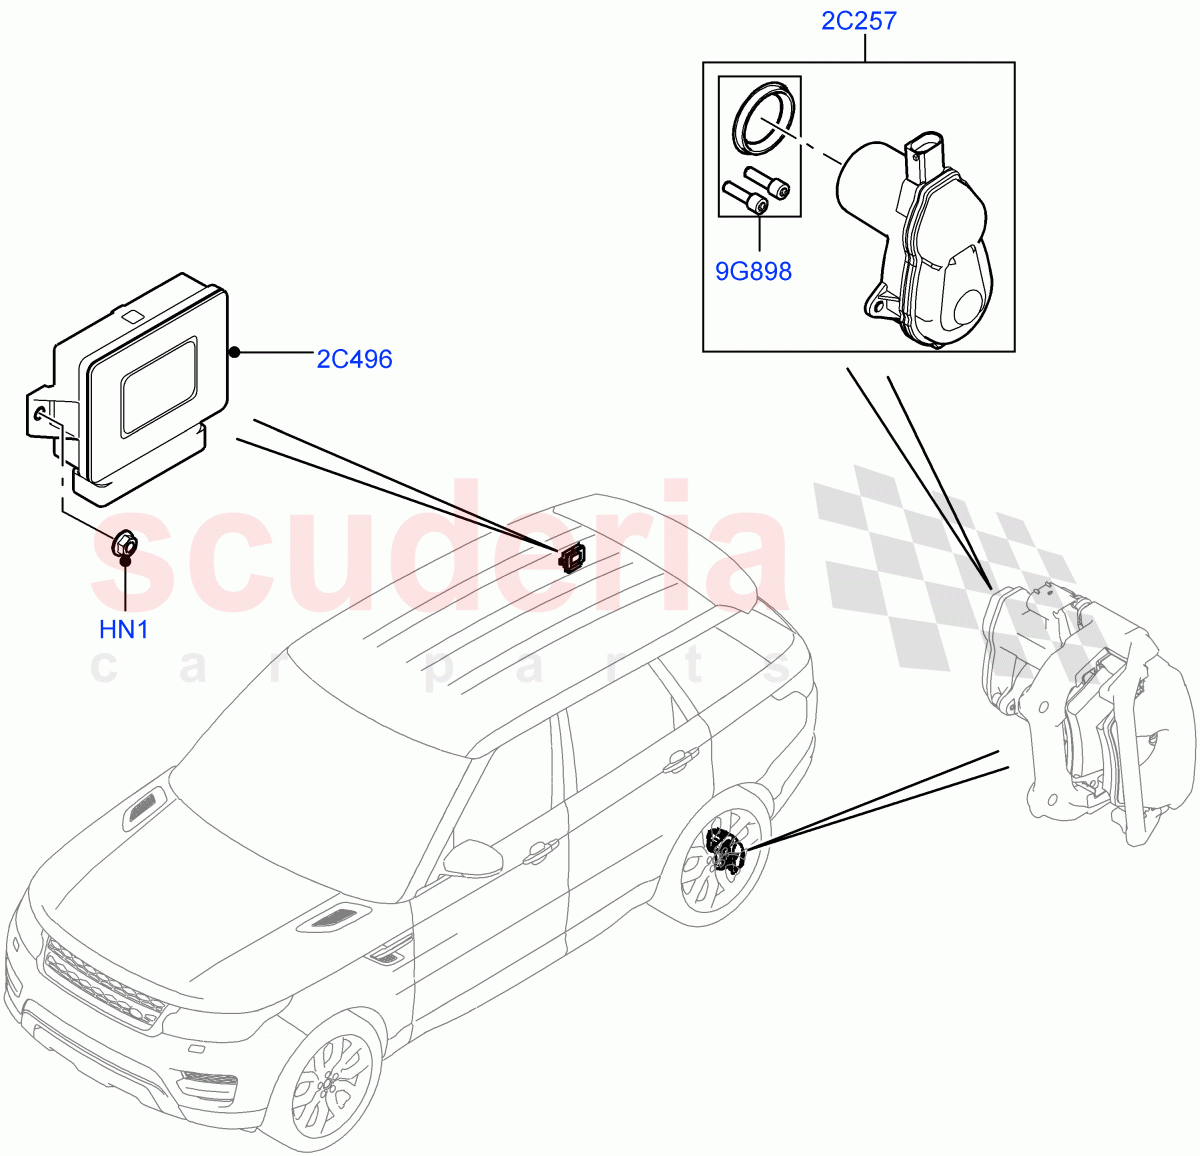 Parking Brake(Electric Parking Brake Actuator And Cables) of Land Rover Land Rover Range Rover Sport (2014+) [2.0 Turbo Diesel]